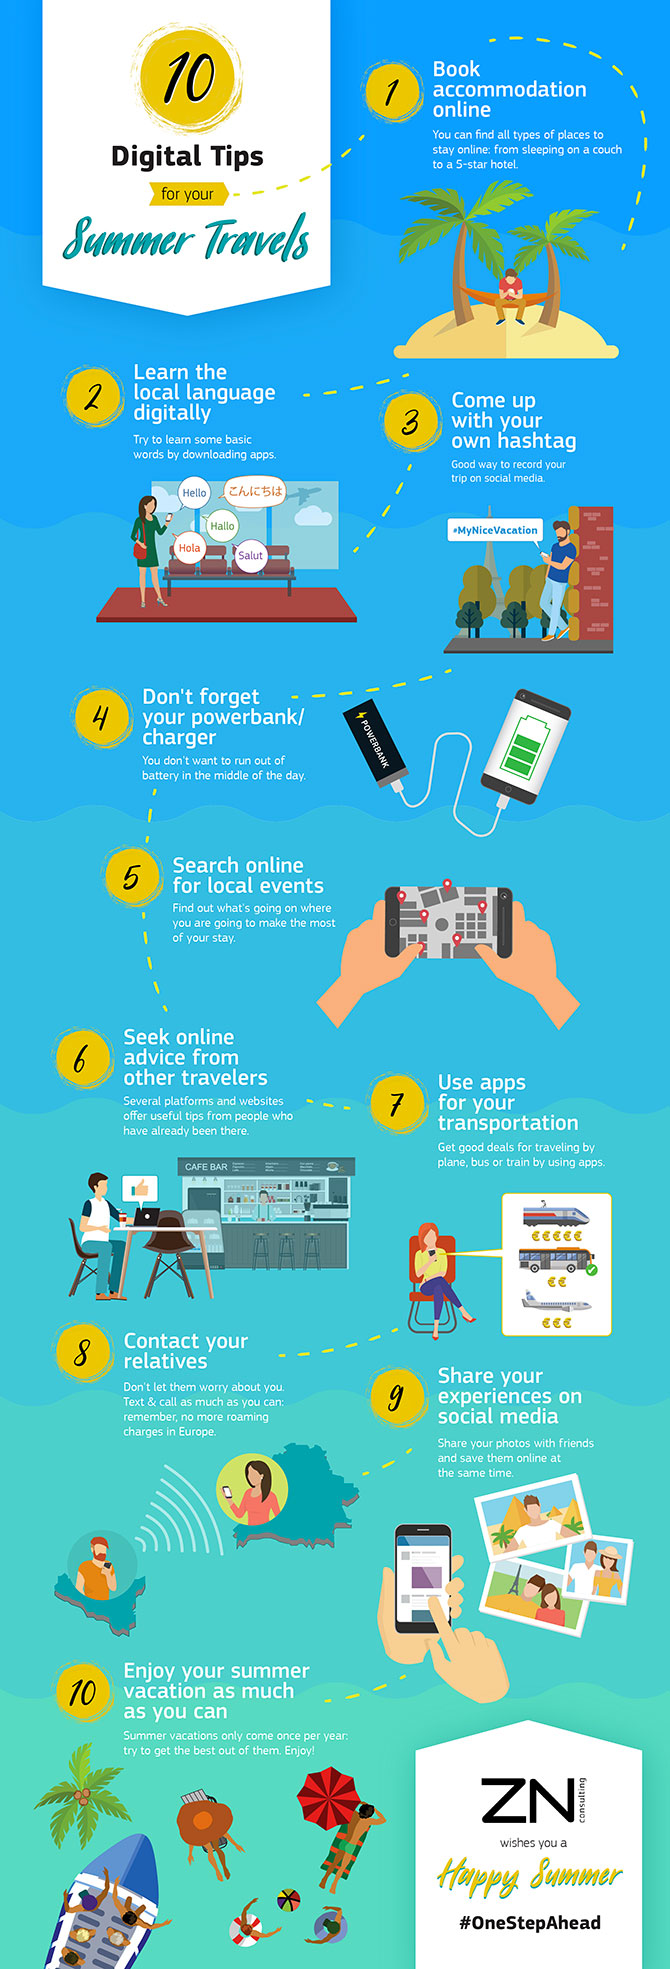 Infographic - 10 Tips for you digital travel